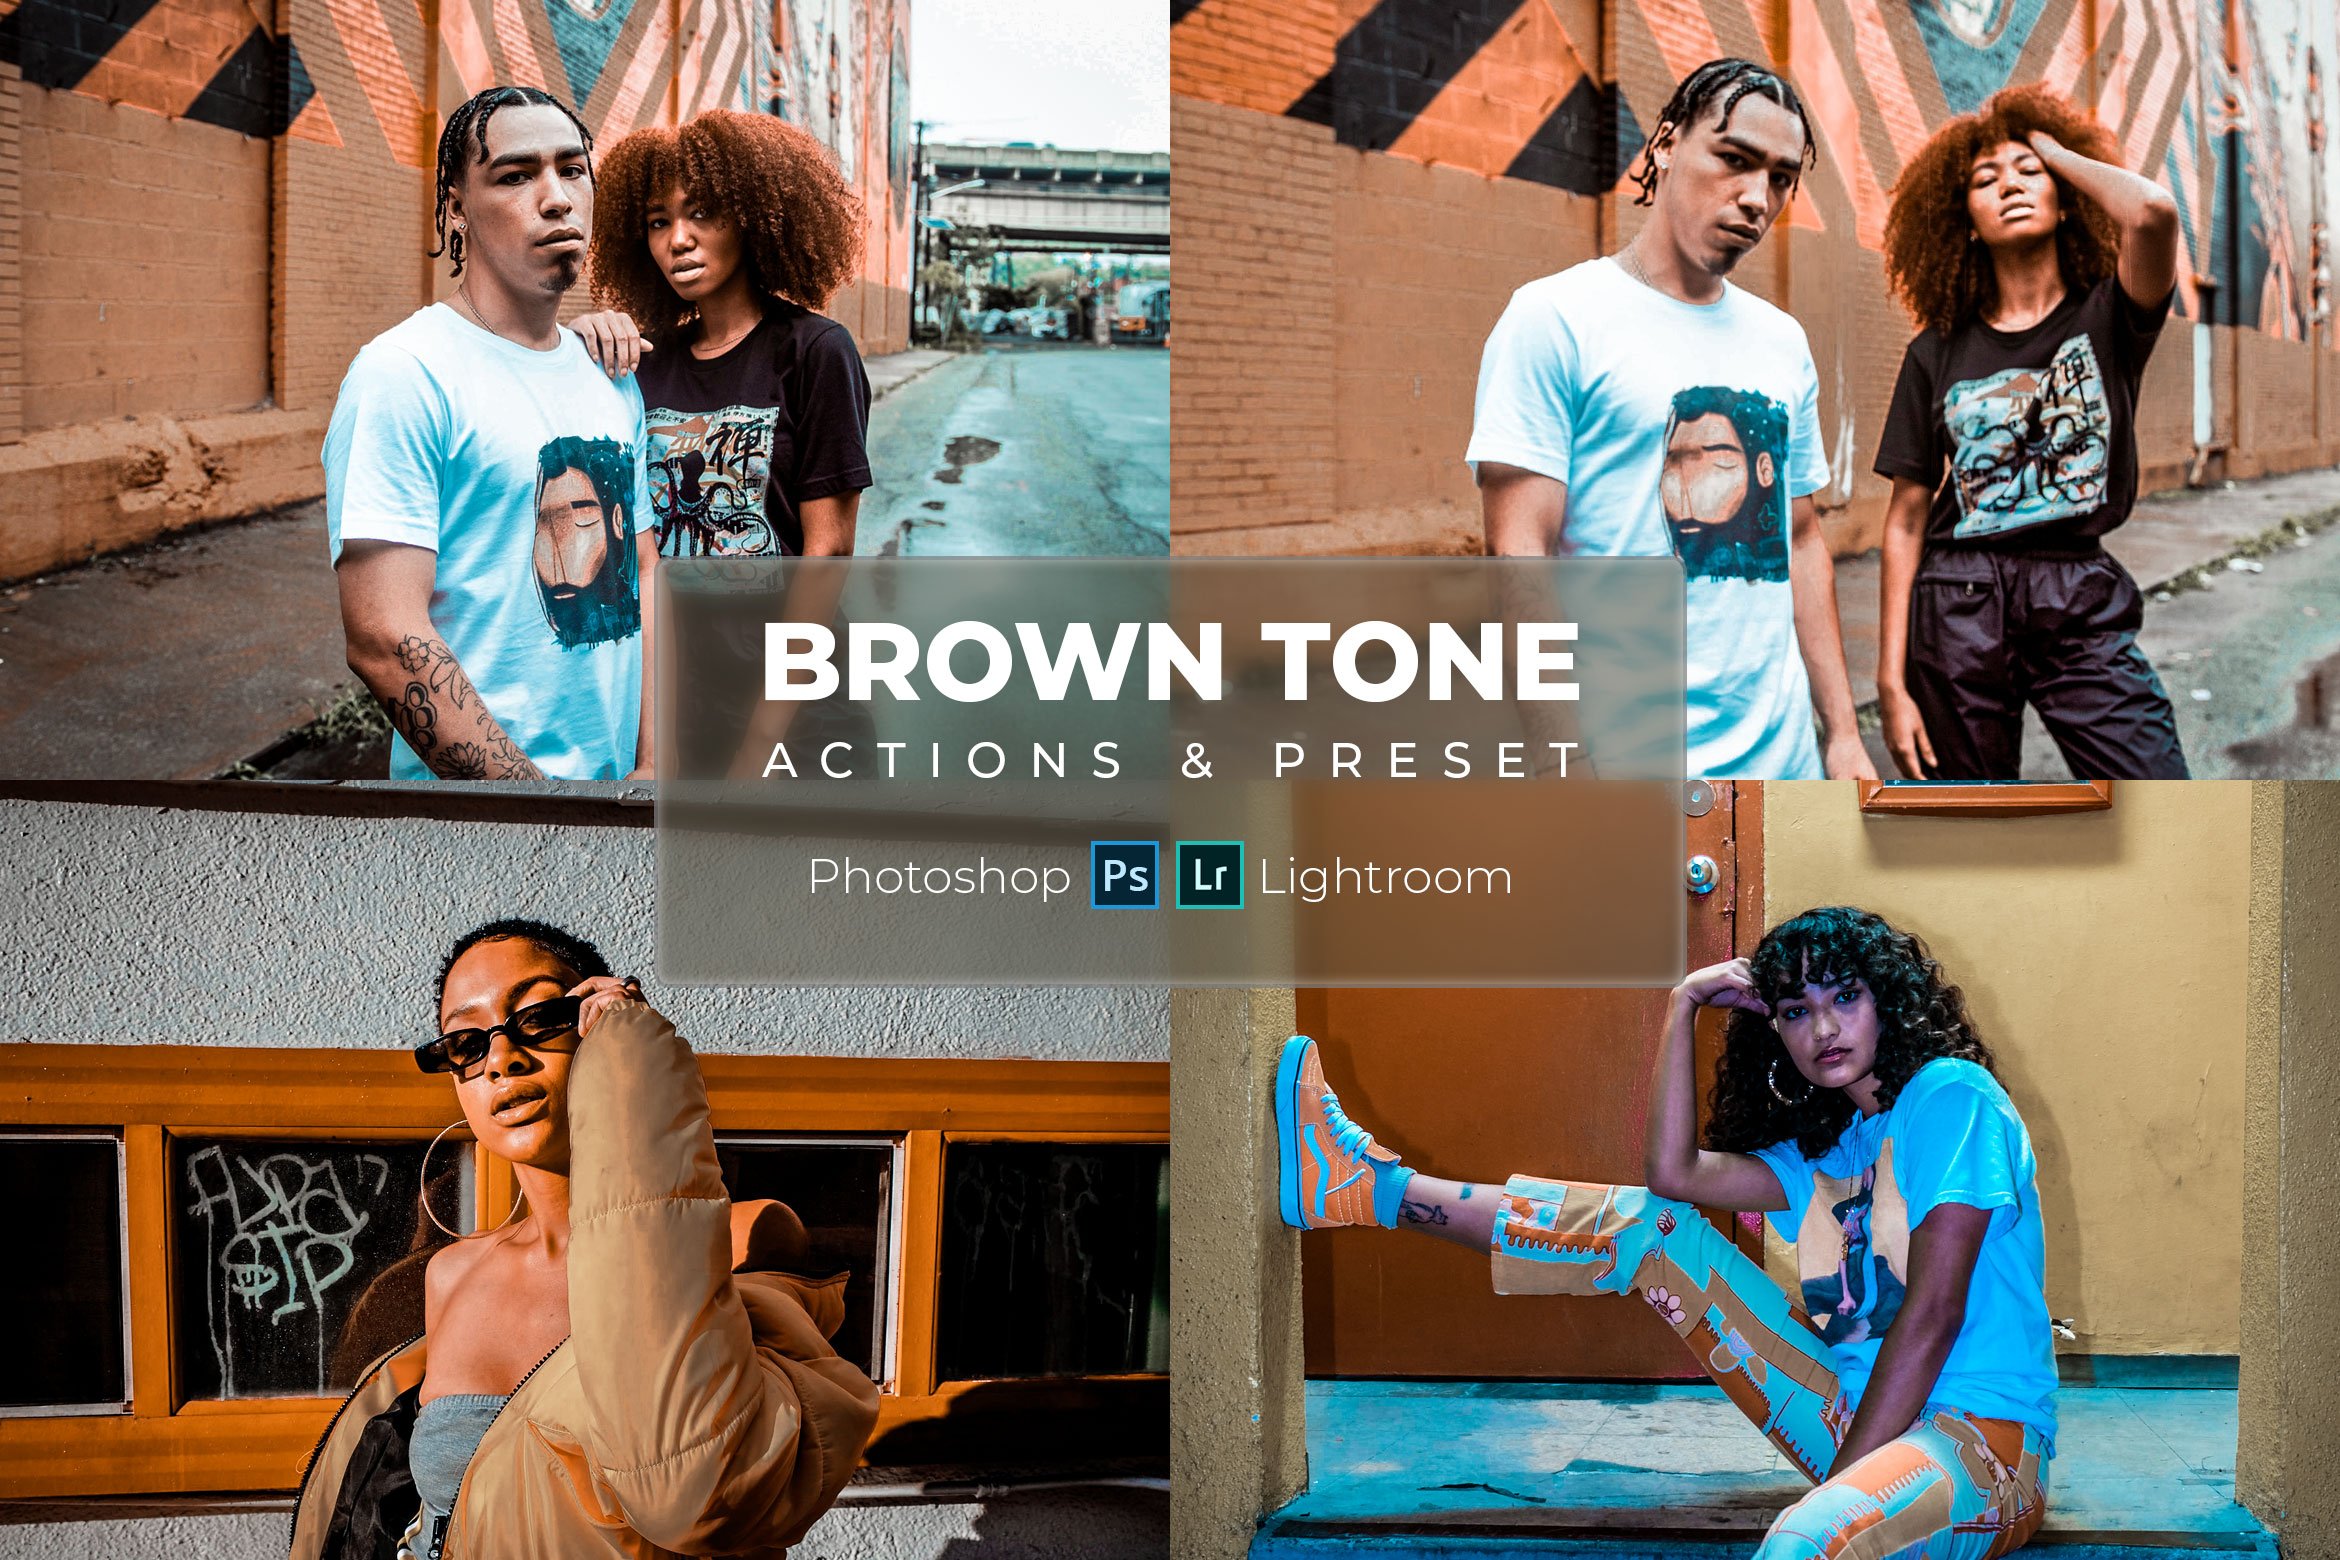 Presets & Actions - Brown Tonecover image.